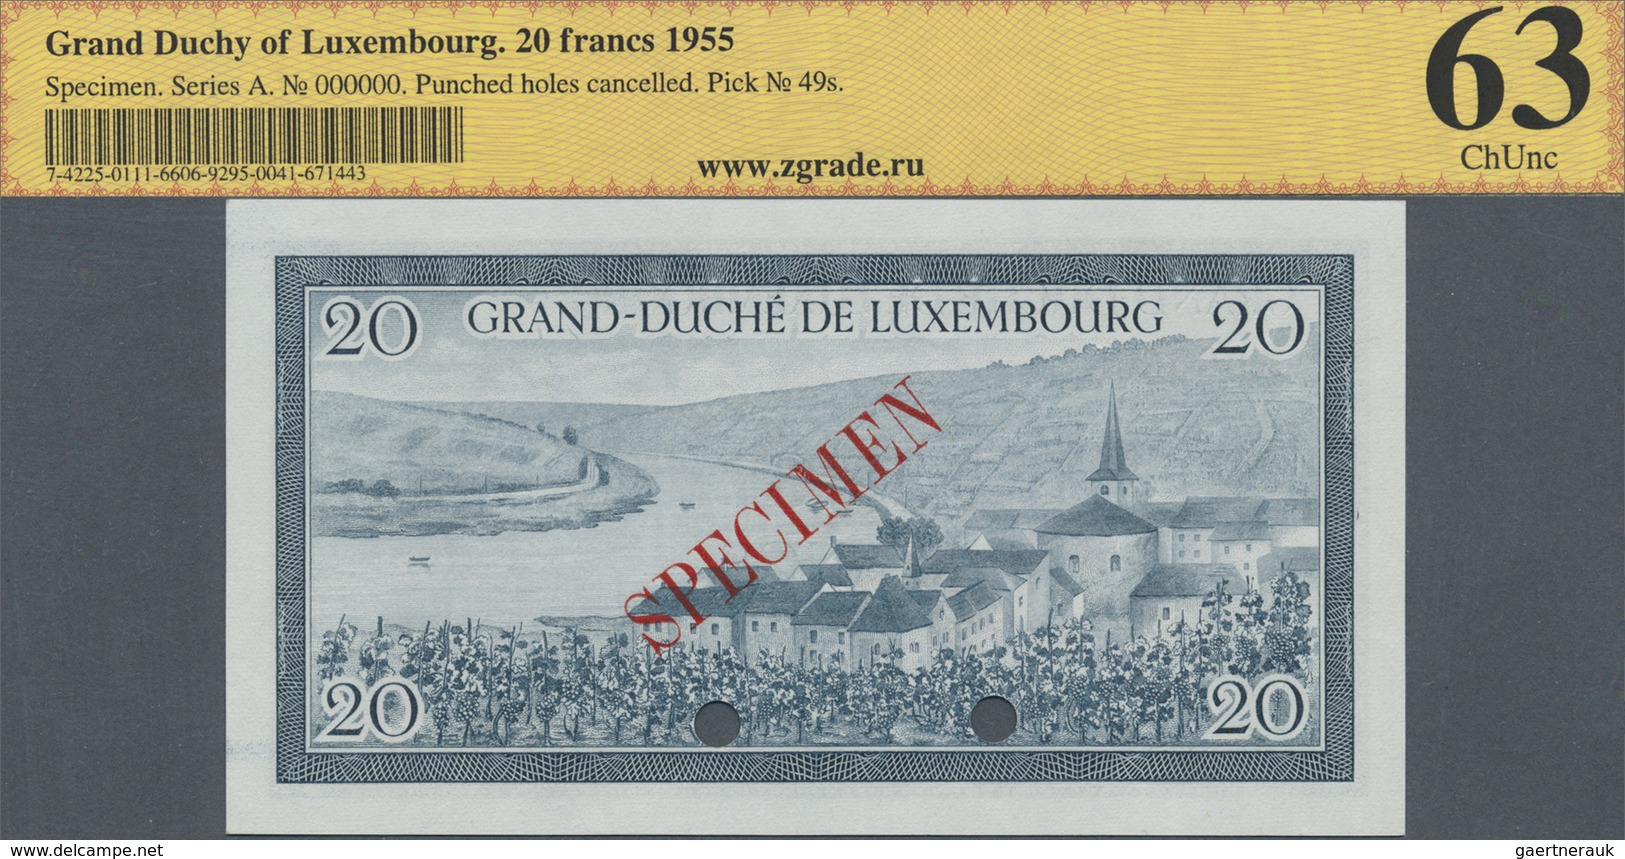 Luxembourg: 20 Francs 1955 Specimen P. 49s, ZG Graded 63 ChUNC. - Luxembourg